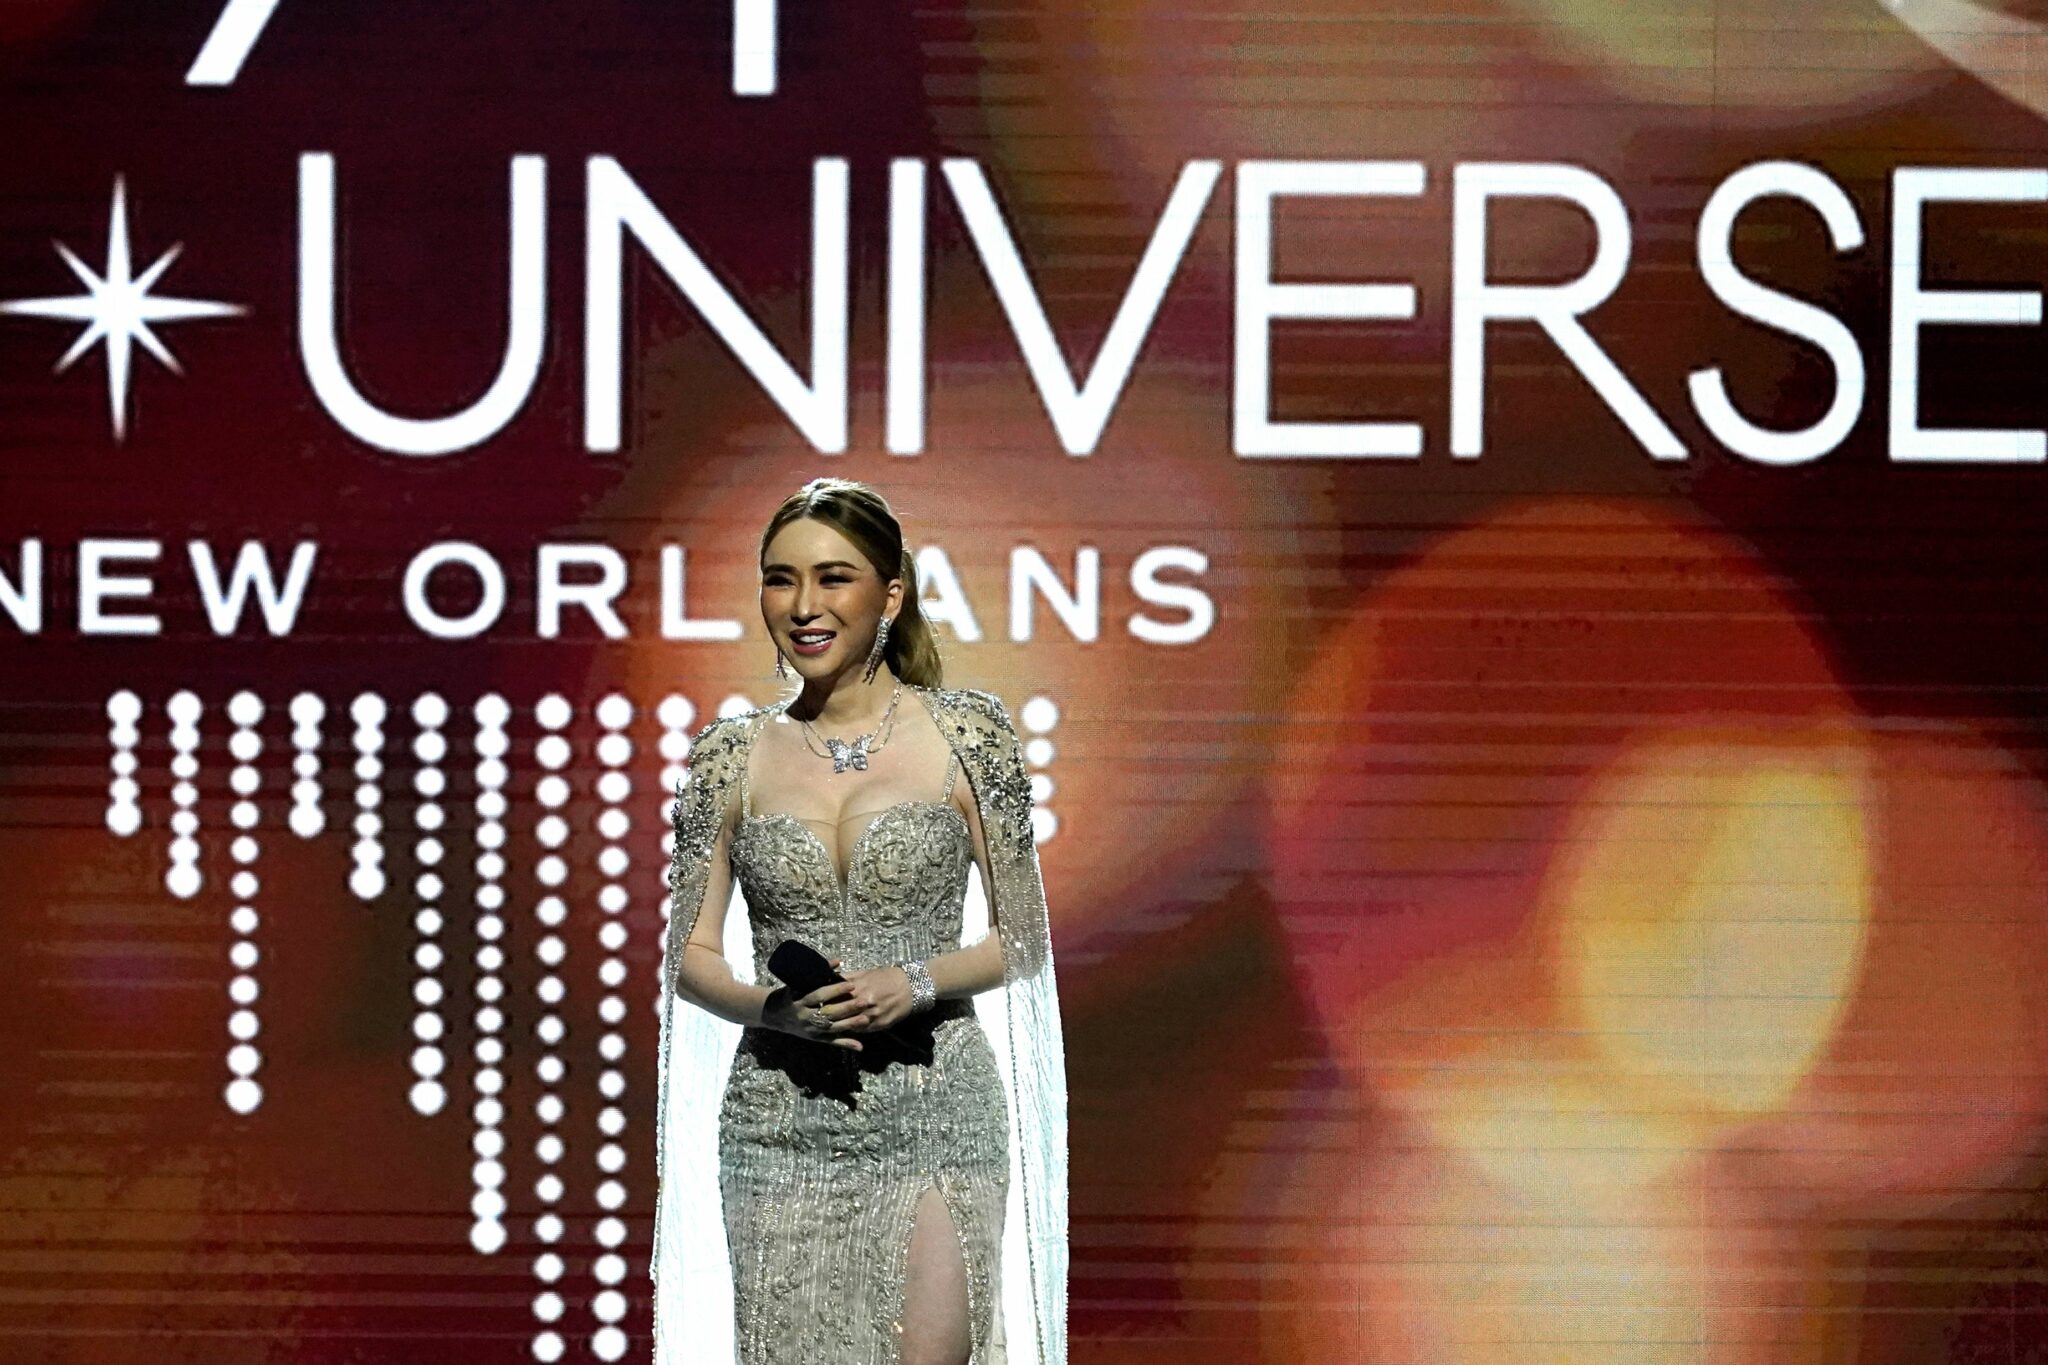 Thai businesswoman and owner of Miss Universe pageant Anne Jakkaphong Jakrajutatip speaks during the 71st Miss Universe competition at the New Orleans Ernest N. Morial Convention Center in New Orleans, Louisiana on January 14, 2023. (Photo by TIMOTHY A. CLARY / AFP) (Photo by TIMOTHY A. CLARY/AFP via Getty Images)